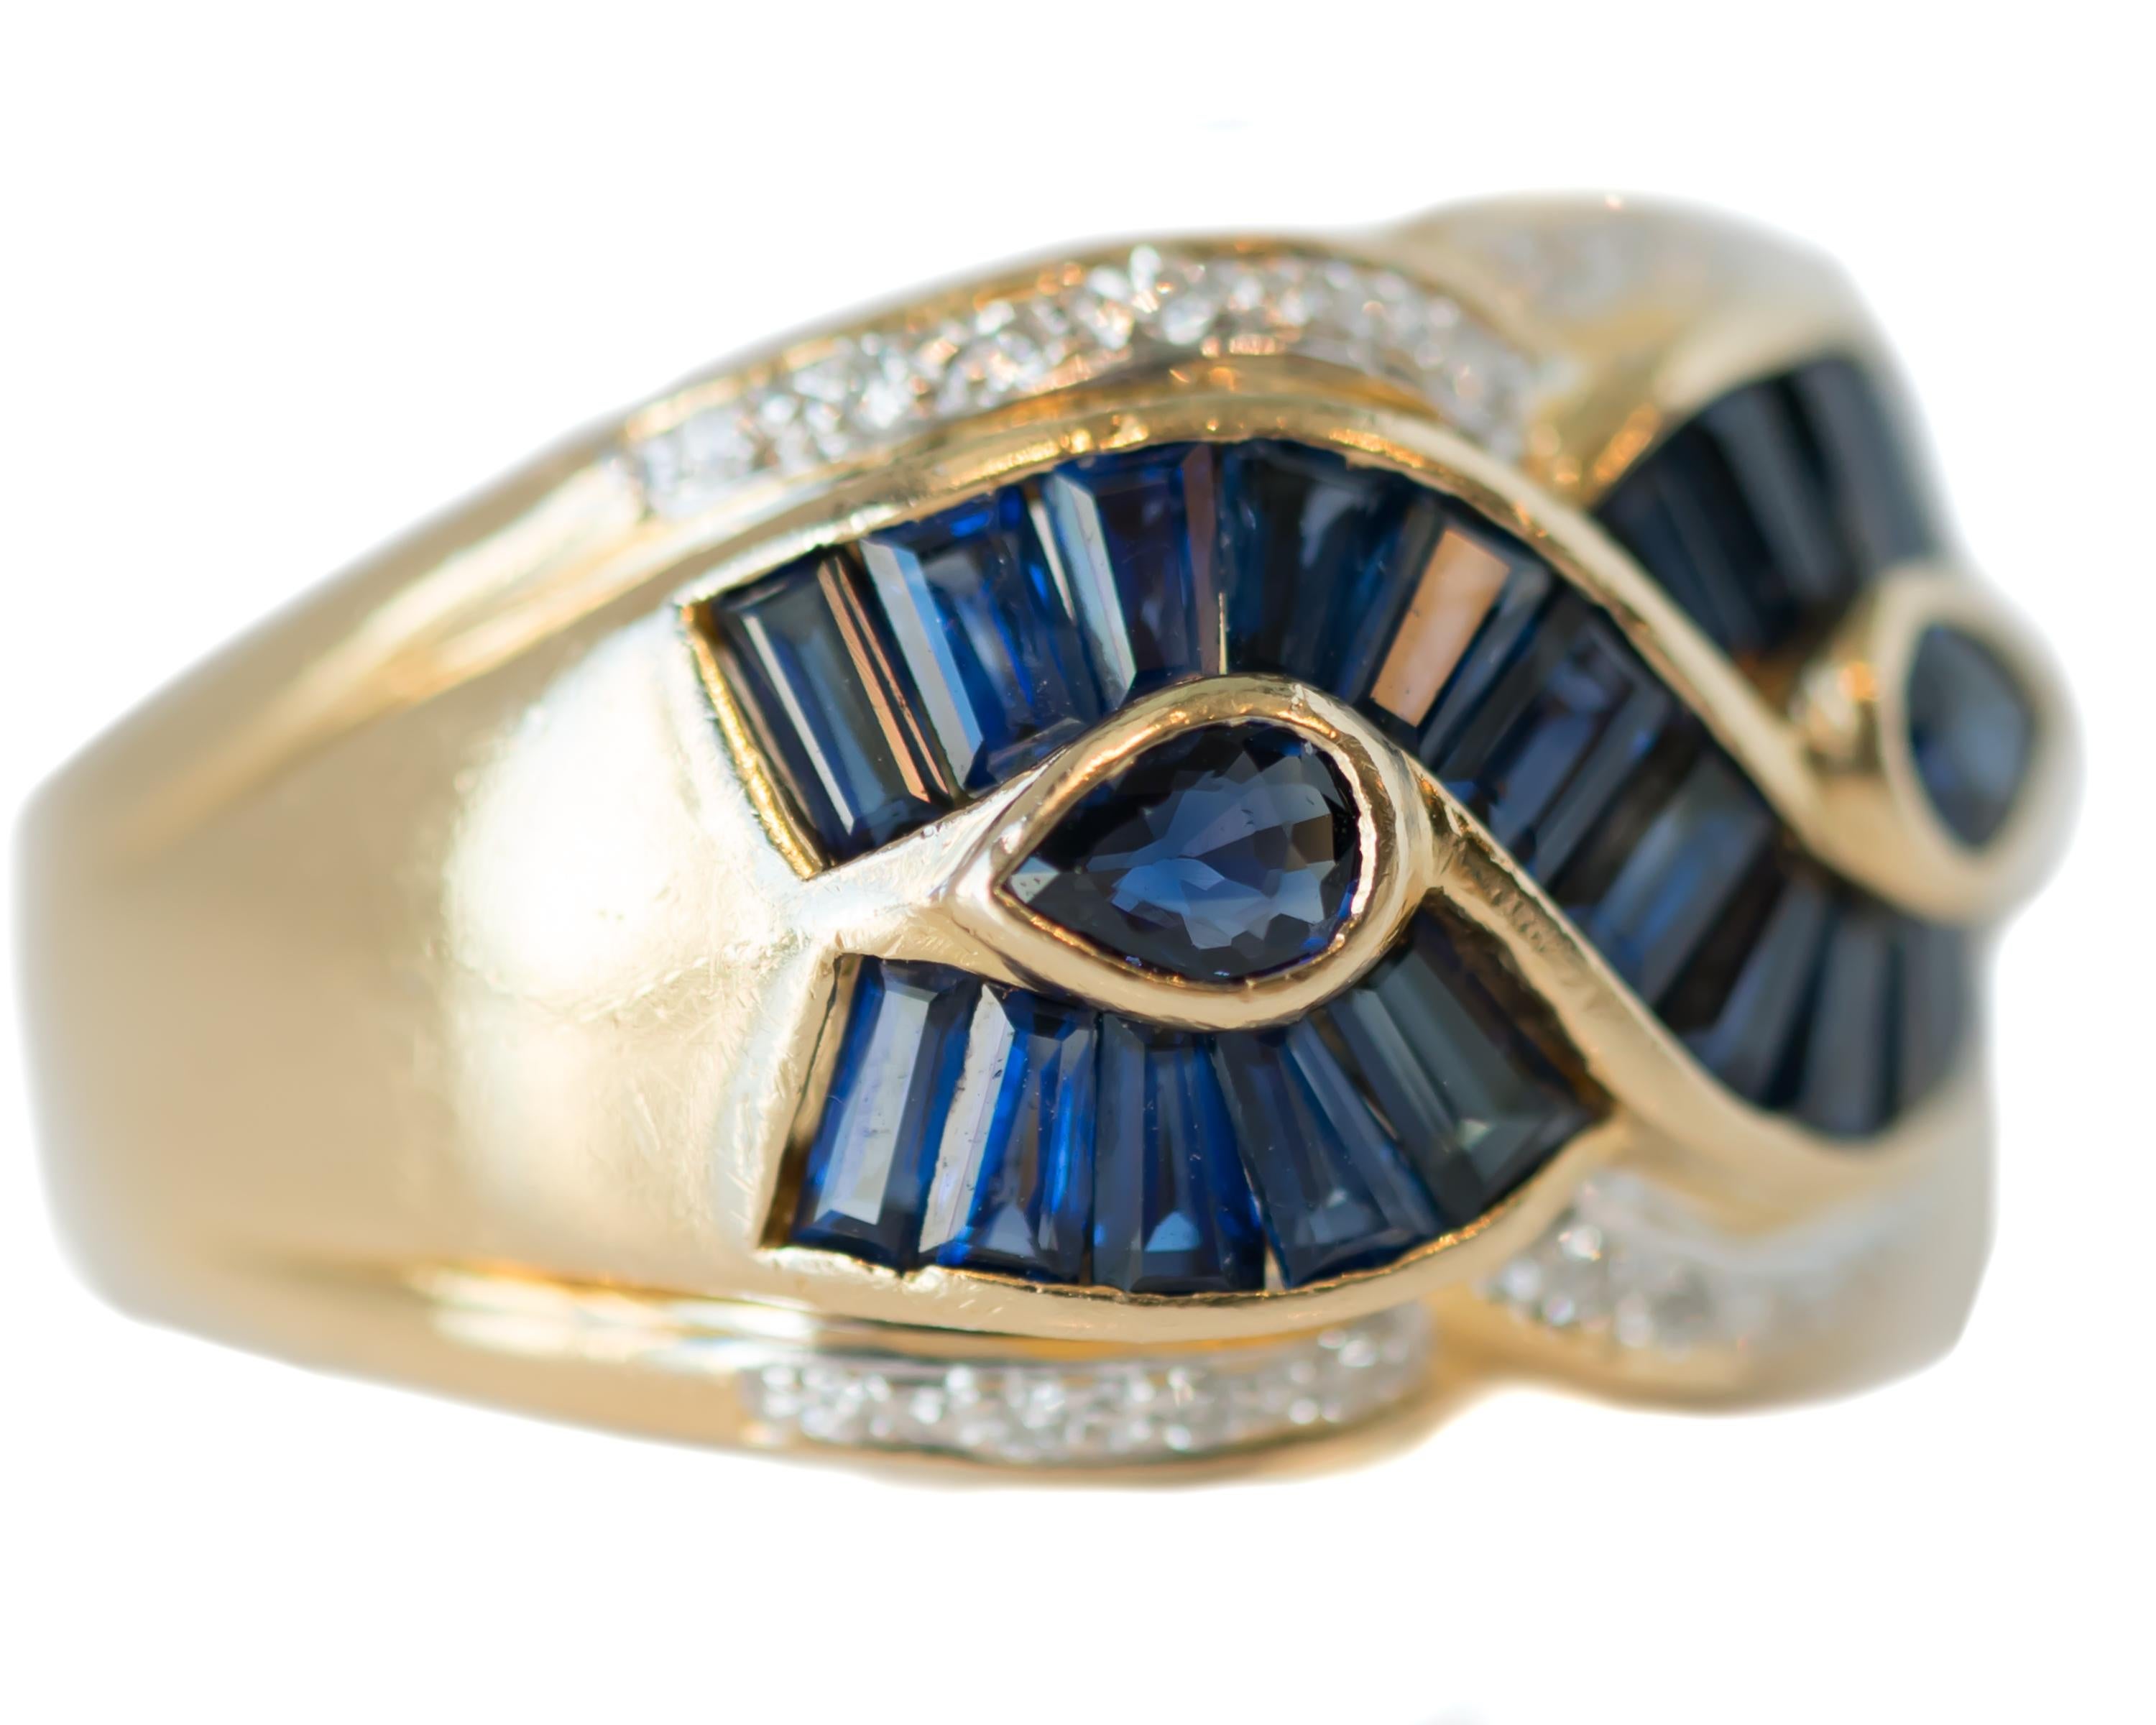 1950s Sapphire and Diamond Gold Band Ring - 18 Karat Yellow Gold, Sapphires, Diamonds

Features:
2.0 carat total Blue Sapphires
0.25 carat total Diamonds
18 Karat Yellow Gold Setting
Modified Bypass Design
Blue Sapphire Baguettes
2 Pear Shaped Blue